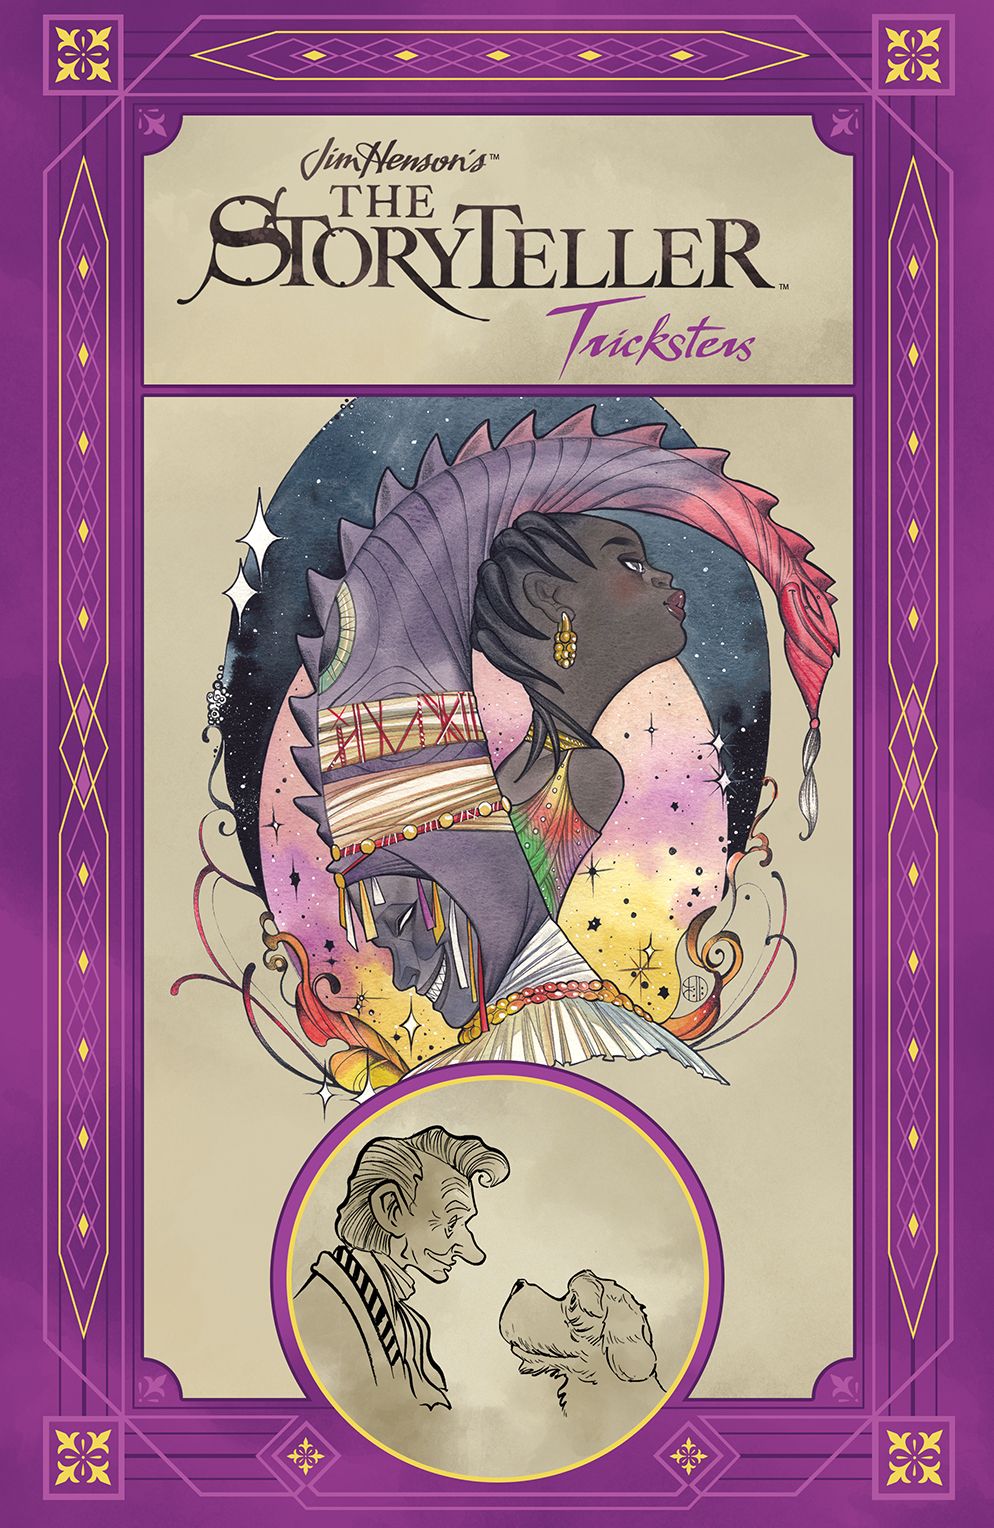 Cover for Jim Henson's THE STORYTELLER: TRICKSTERS hardcover volume. A purple border surrounds the title and central images featuring Peach Momoko's cover art from Jordan Ifueko and Erin Kubo's collaboration, depicting a stylized young Black woman's form half-merged with a sharp-toothed grinning interpretation of Eshu, the Yoruba god of mischief. Below them, enclosed in a circle, the titular Storyteller and his dog gaze at each other fondly. 